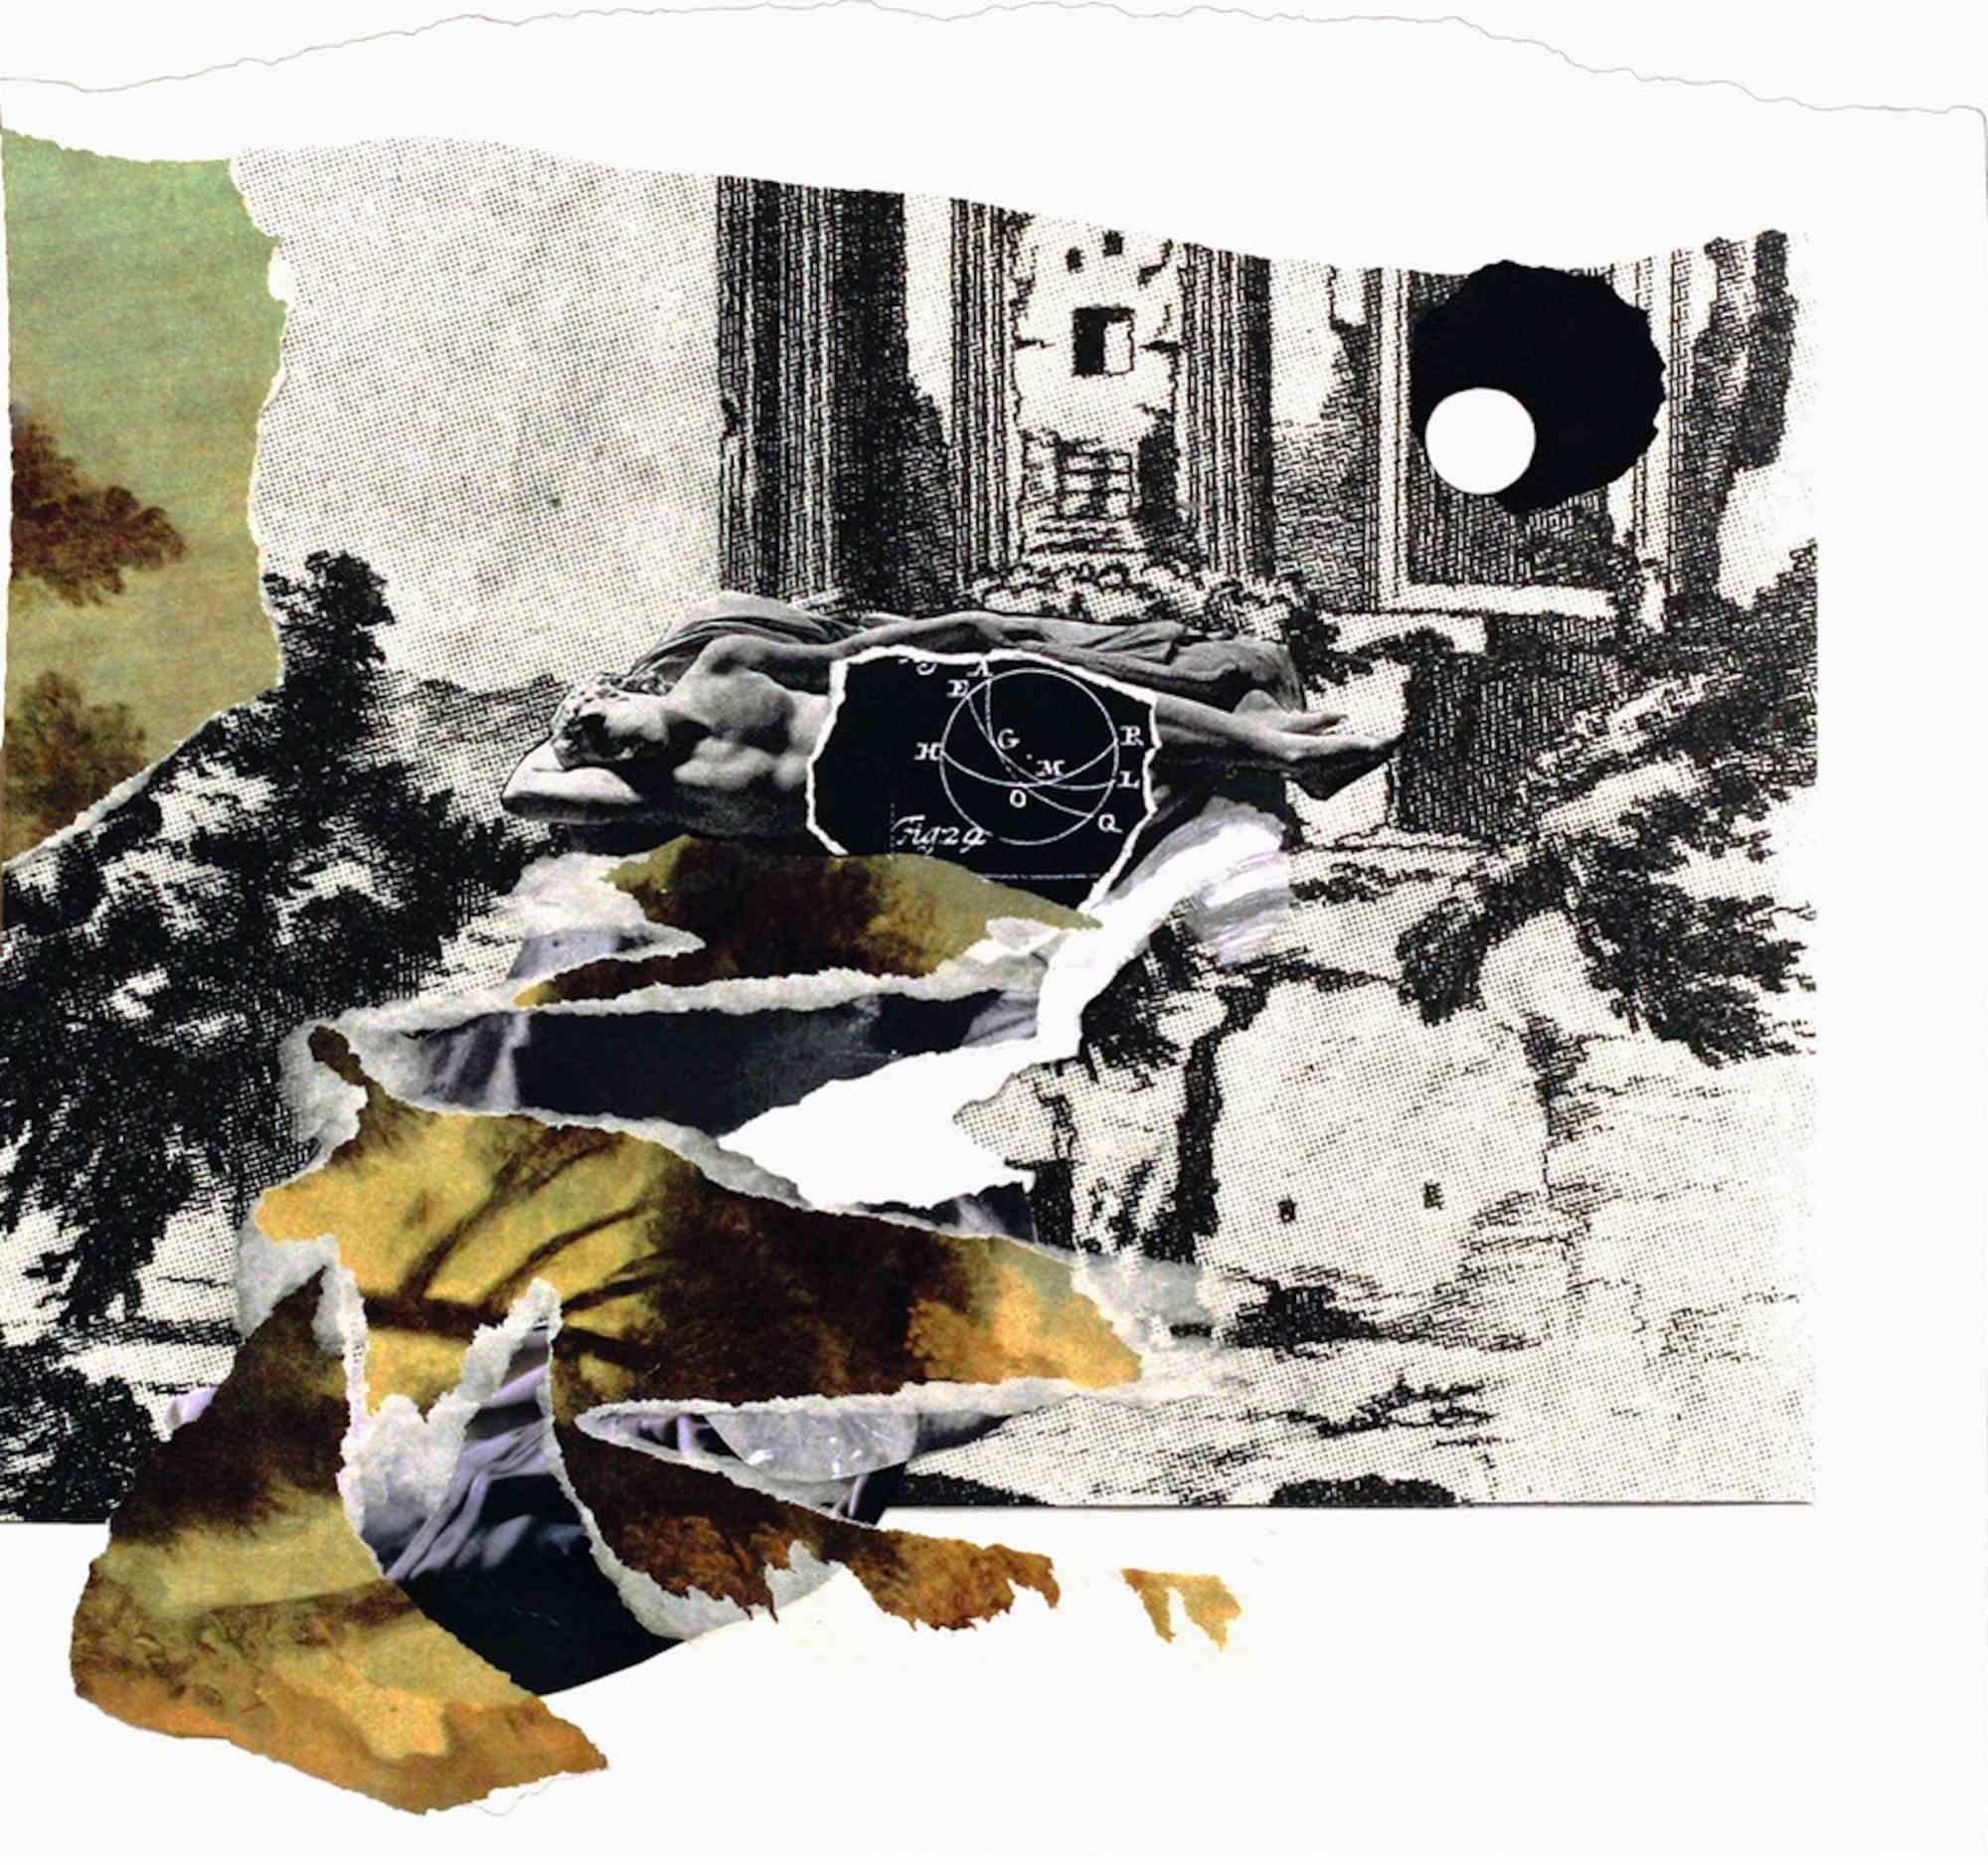 Untitled is an original contemporary artwork realized by Giulio Paolini in 2018

Collage on paper.

Giulio Paolini (Genova, 5 November 1940) is one of the most significant conceptual artists of the international art scene. He started as a graphic